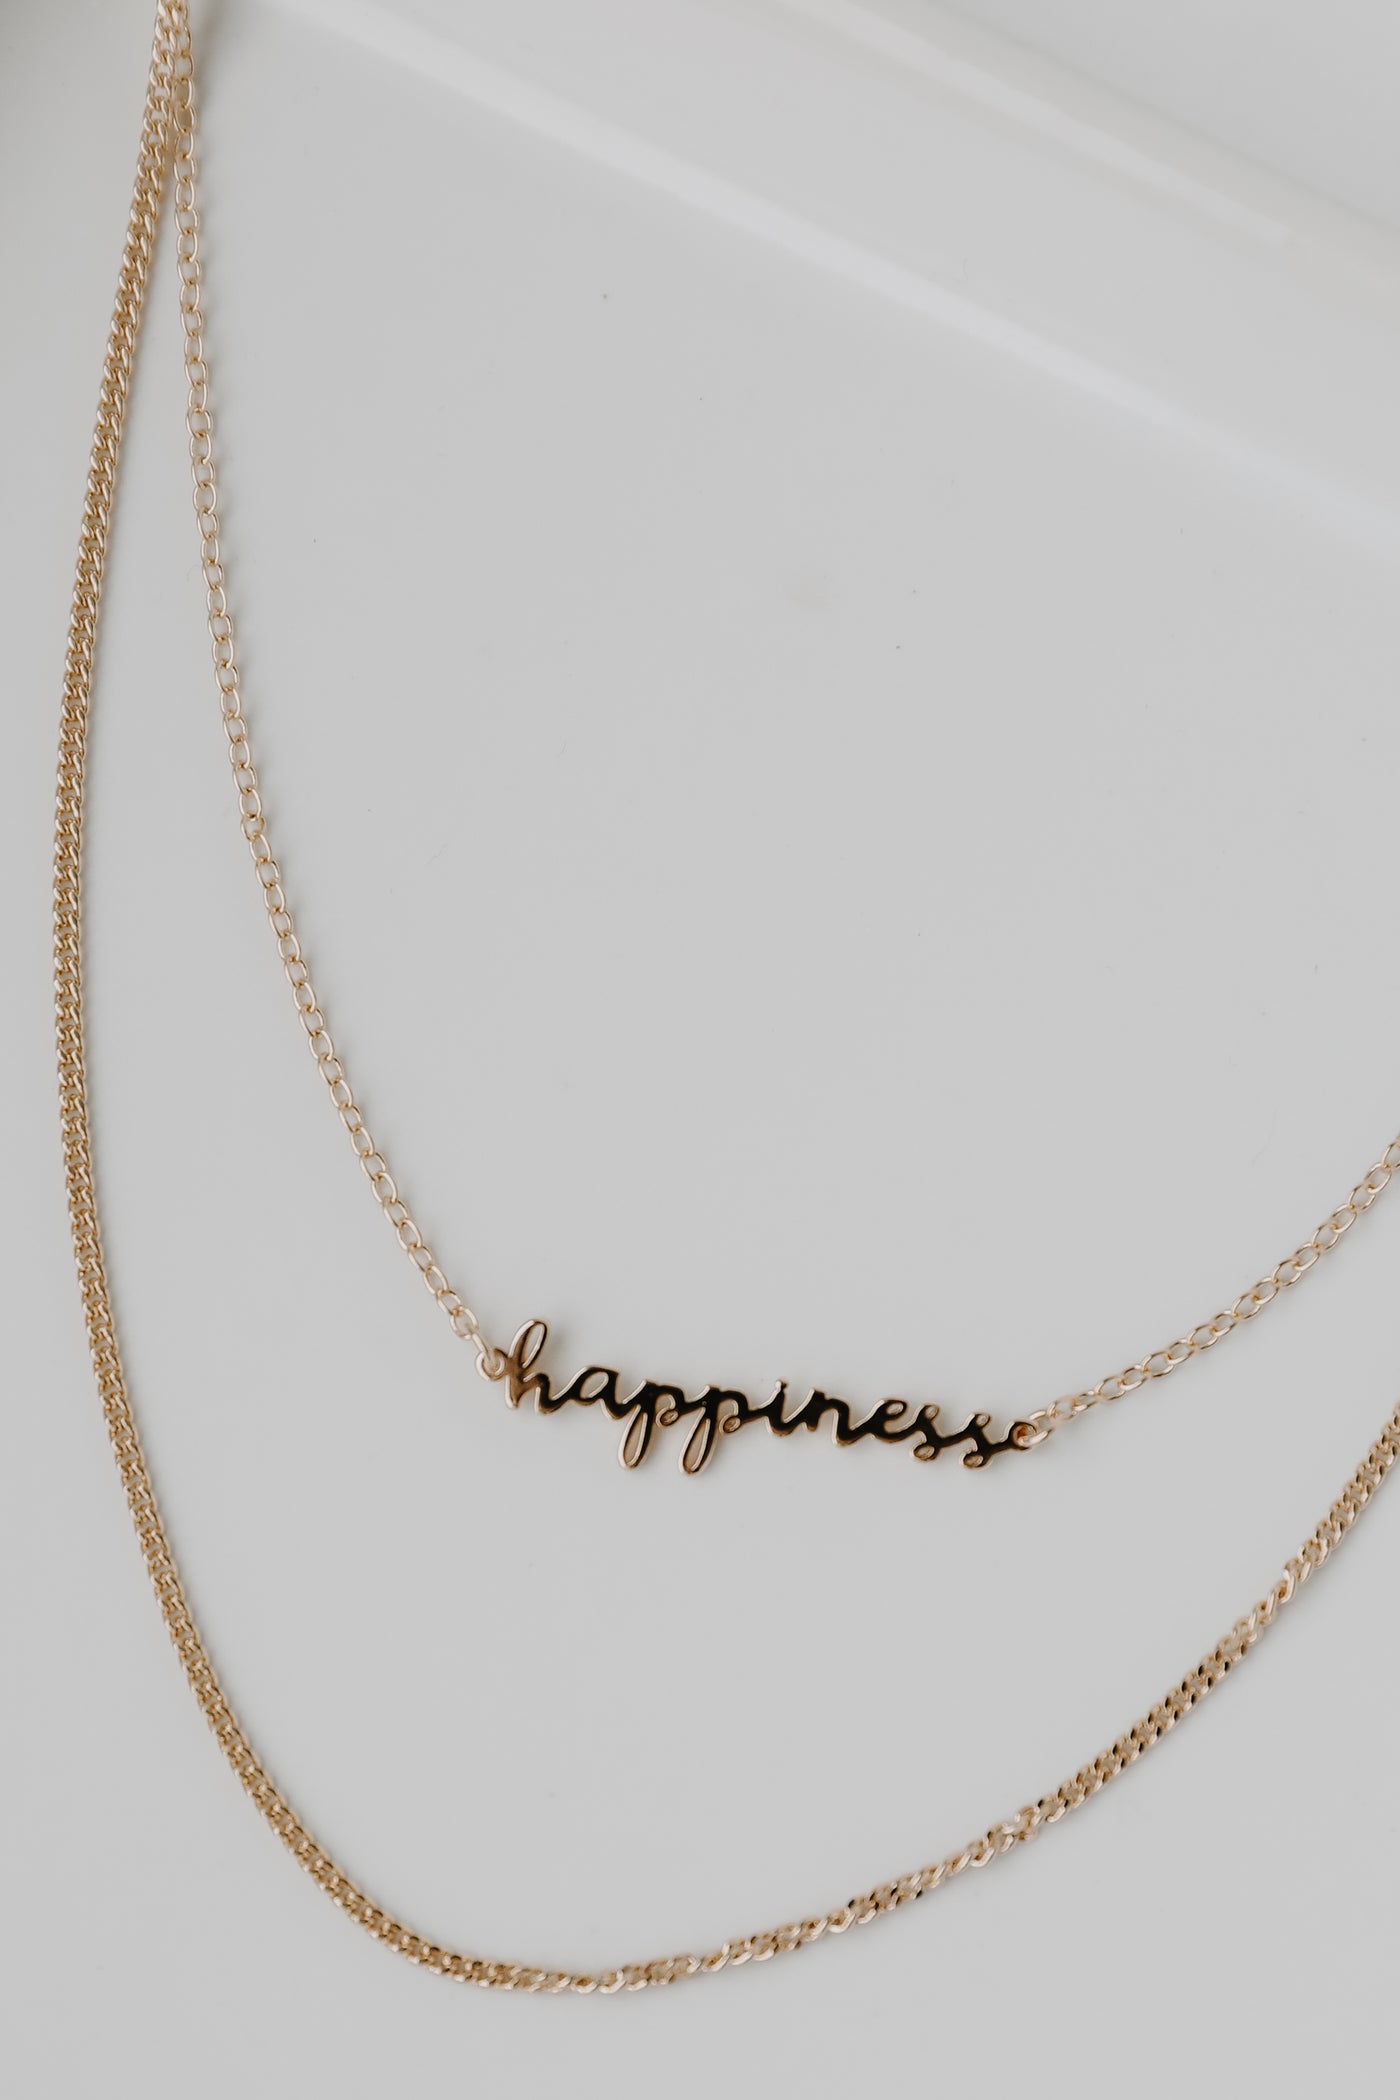 Happiness Gold Layered Necklace from dress up